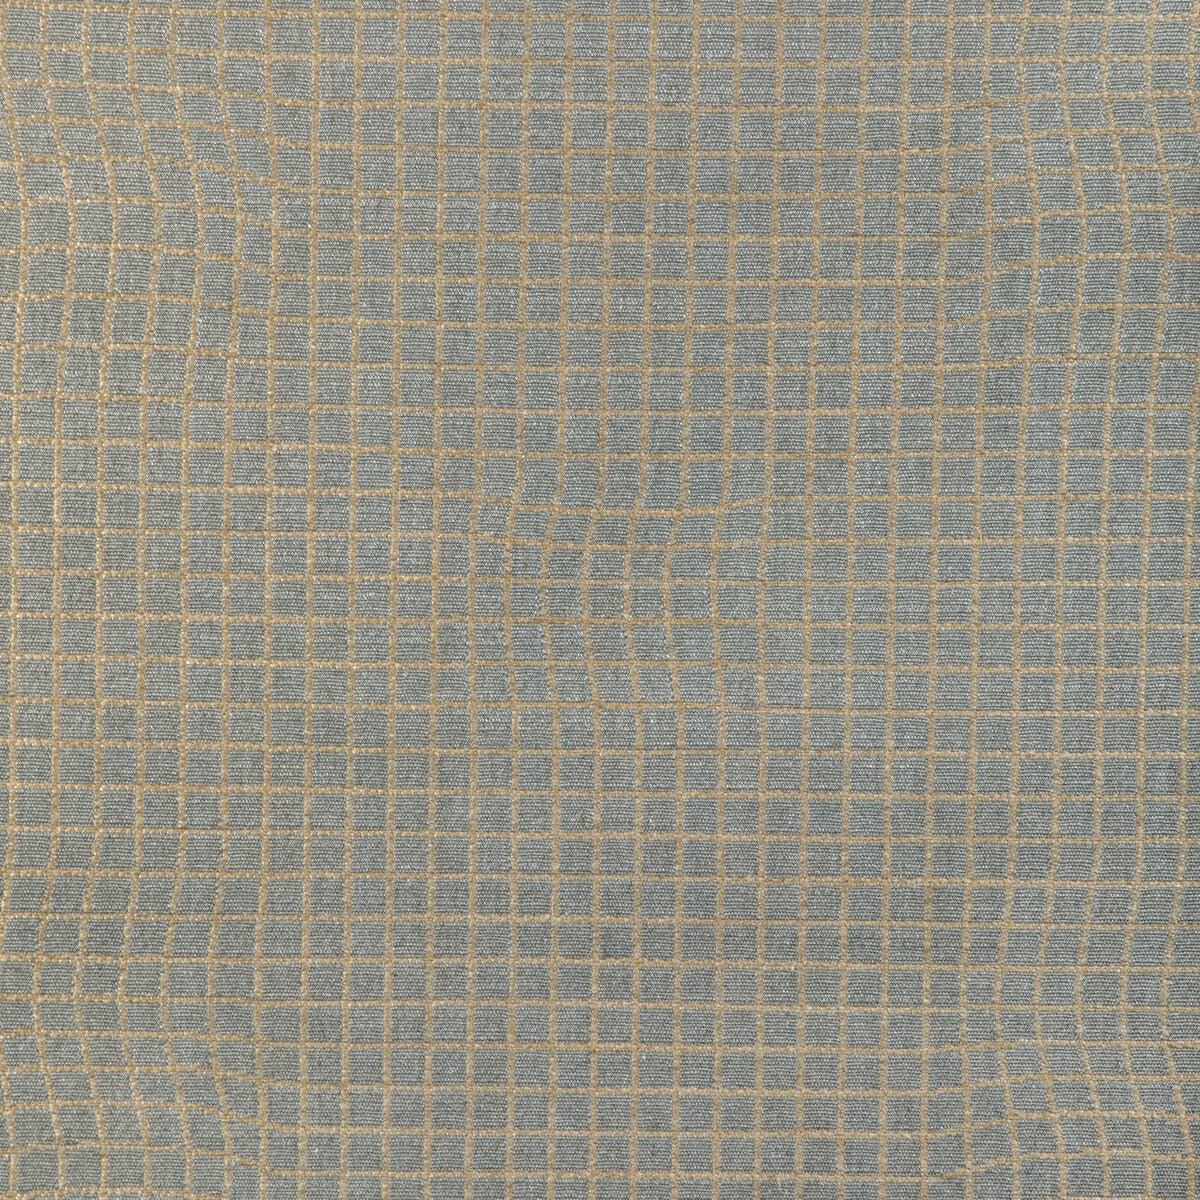 Armature fabric in graphite color - pattern GWF-3792.11.0 - by Lee Jofa Modern in the Kelly Wearstler VII collection